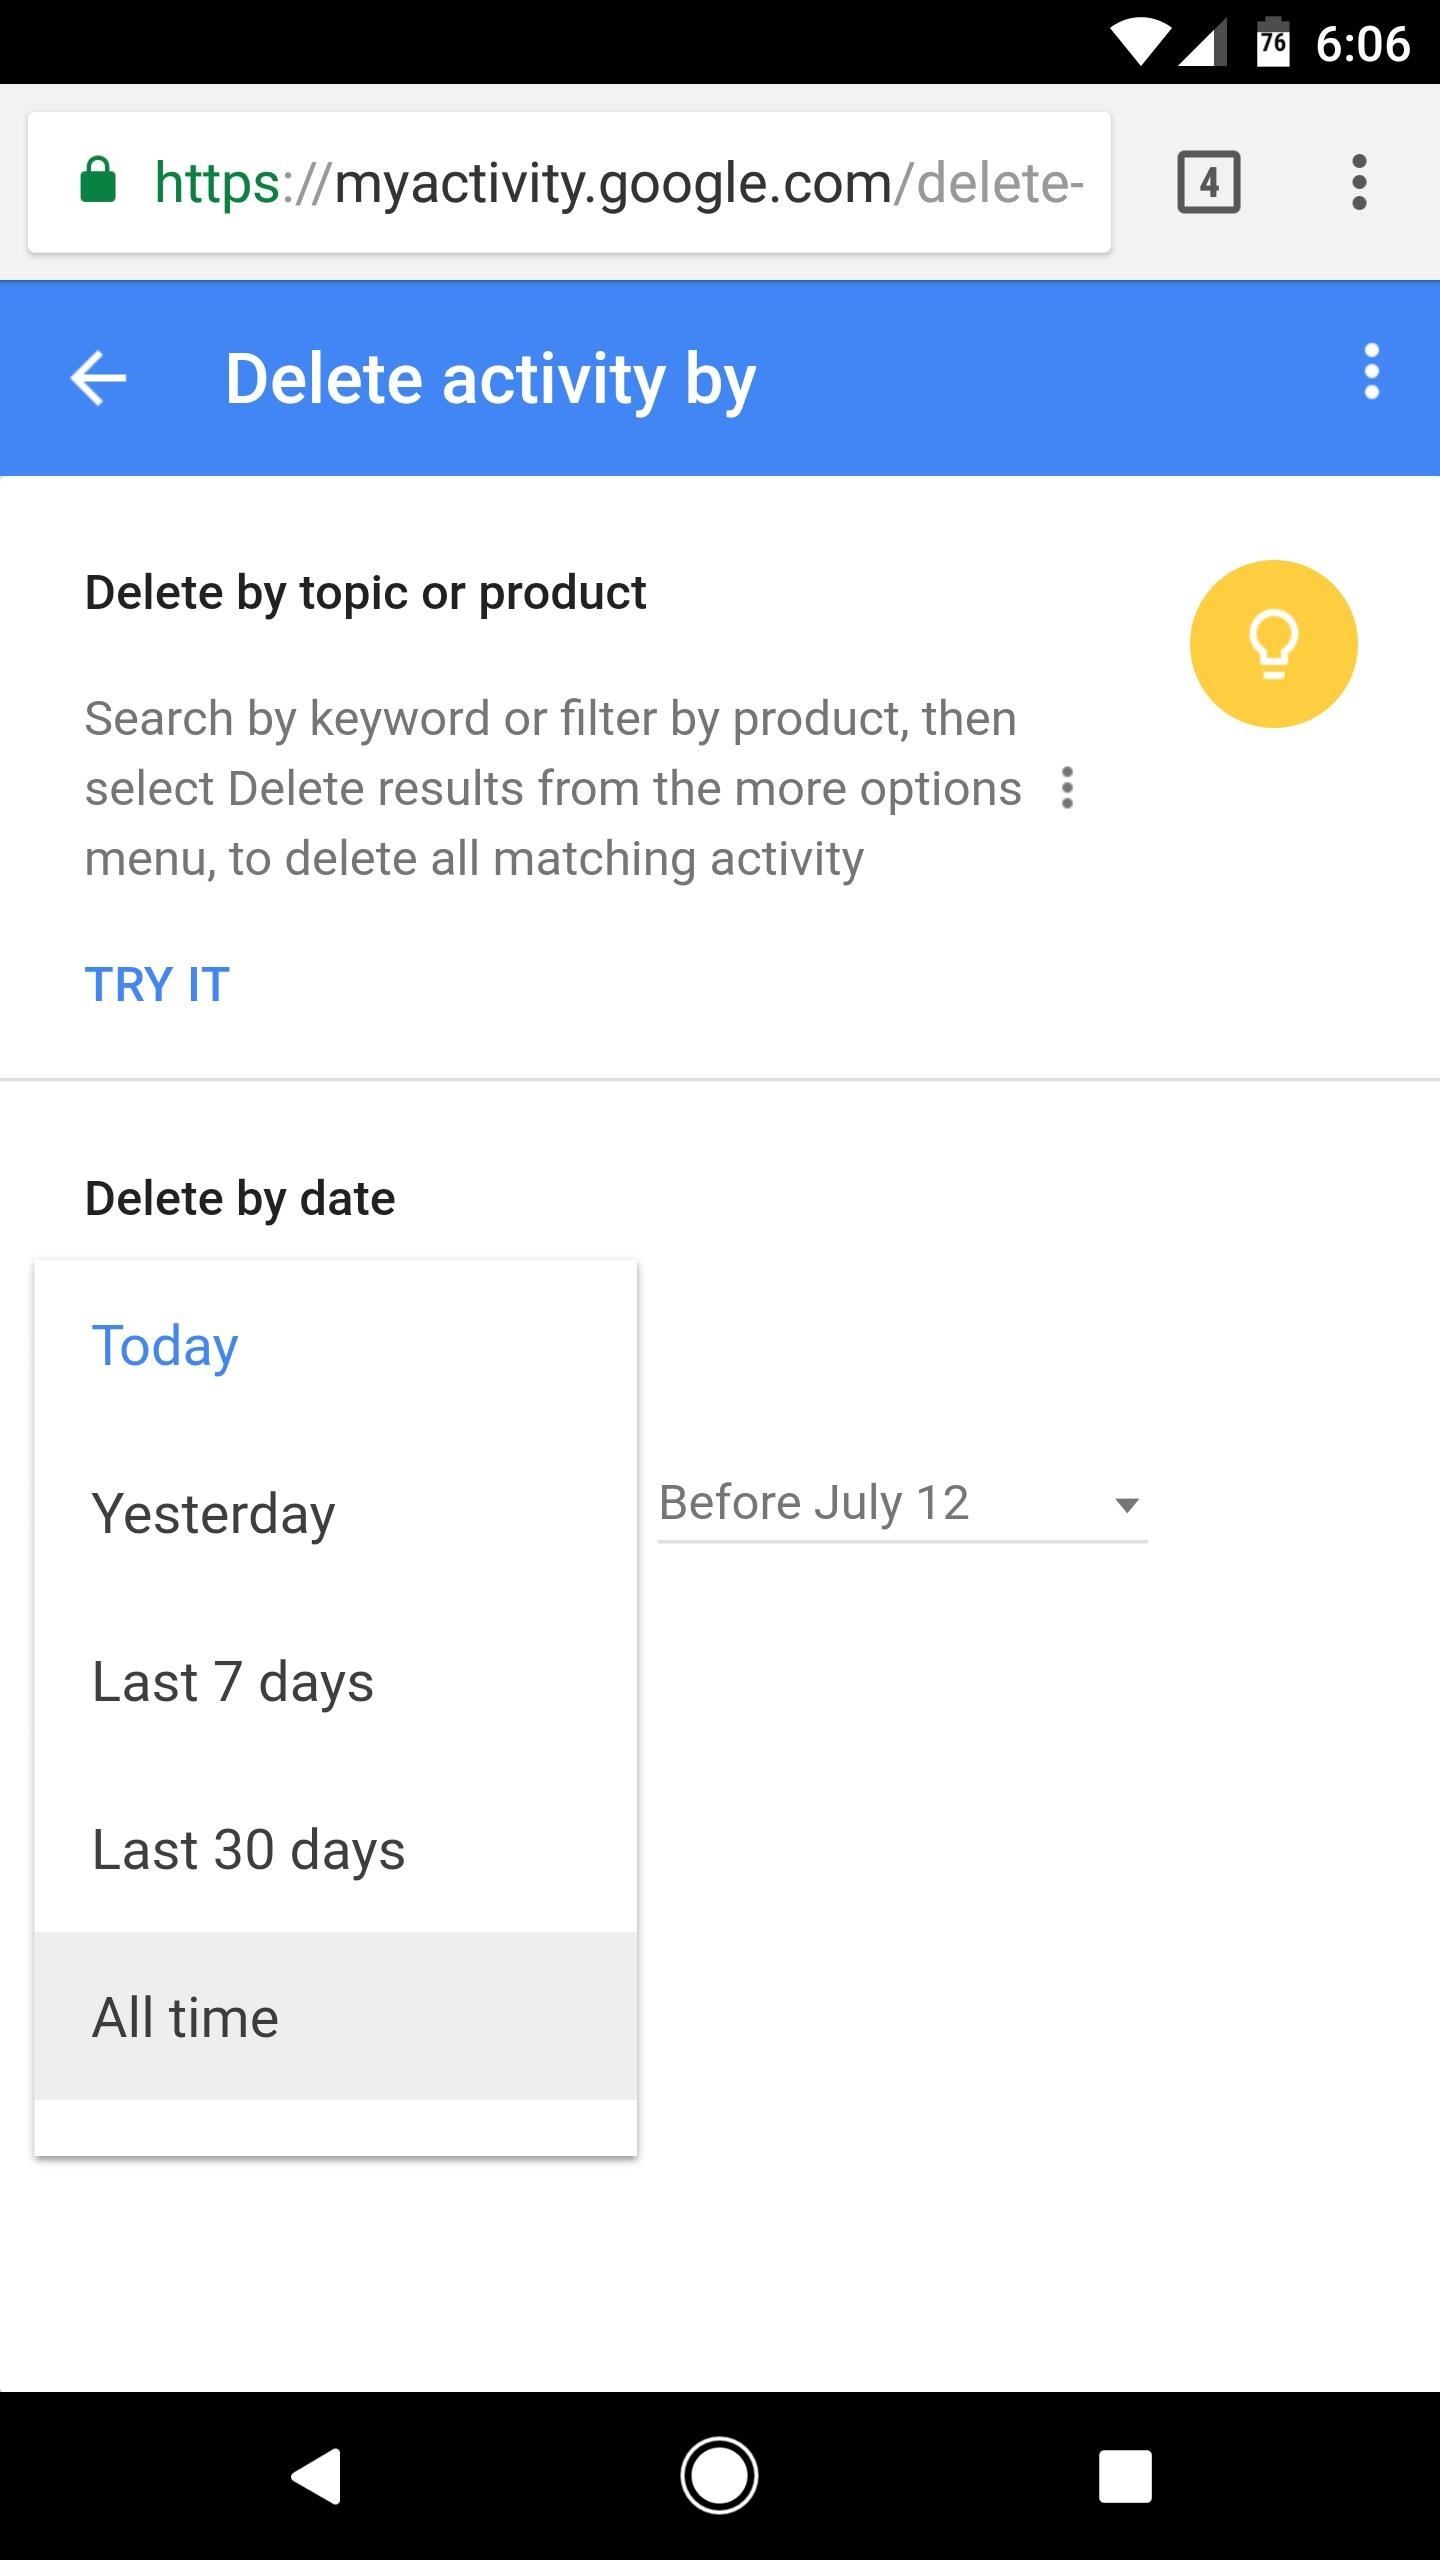 YouTube 101: How to Manage Your Search History & Clear Watched Videos